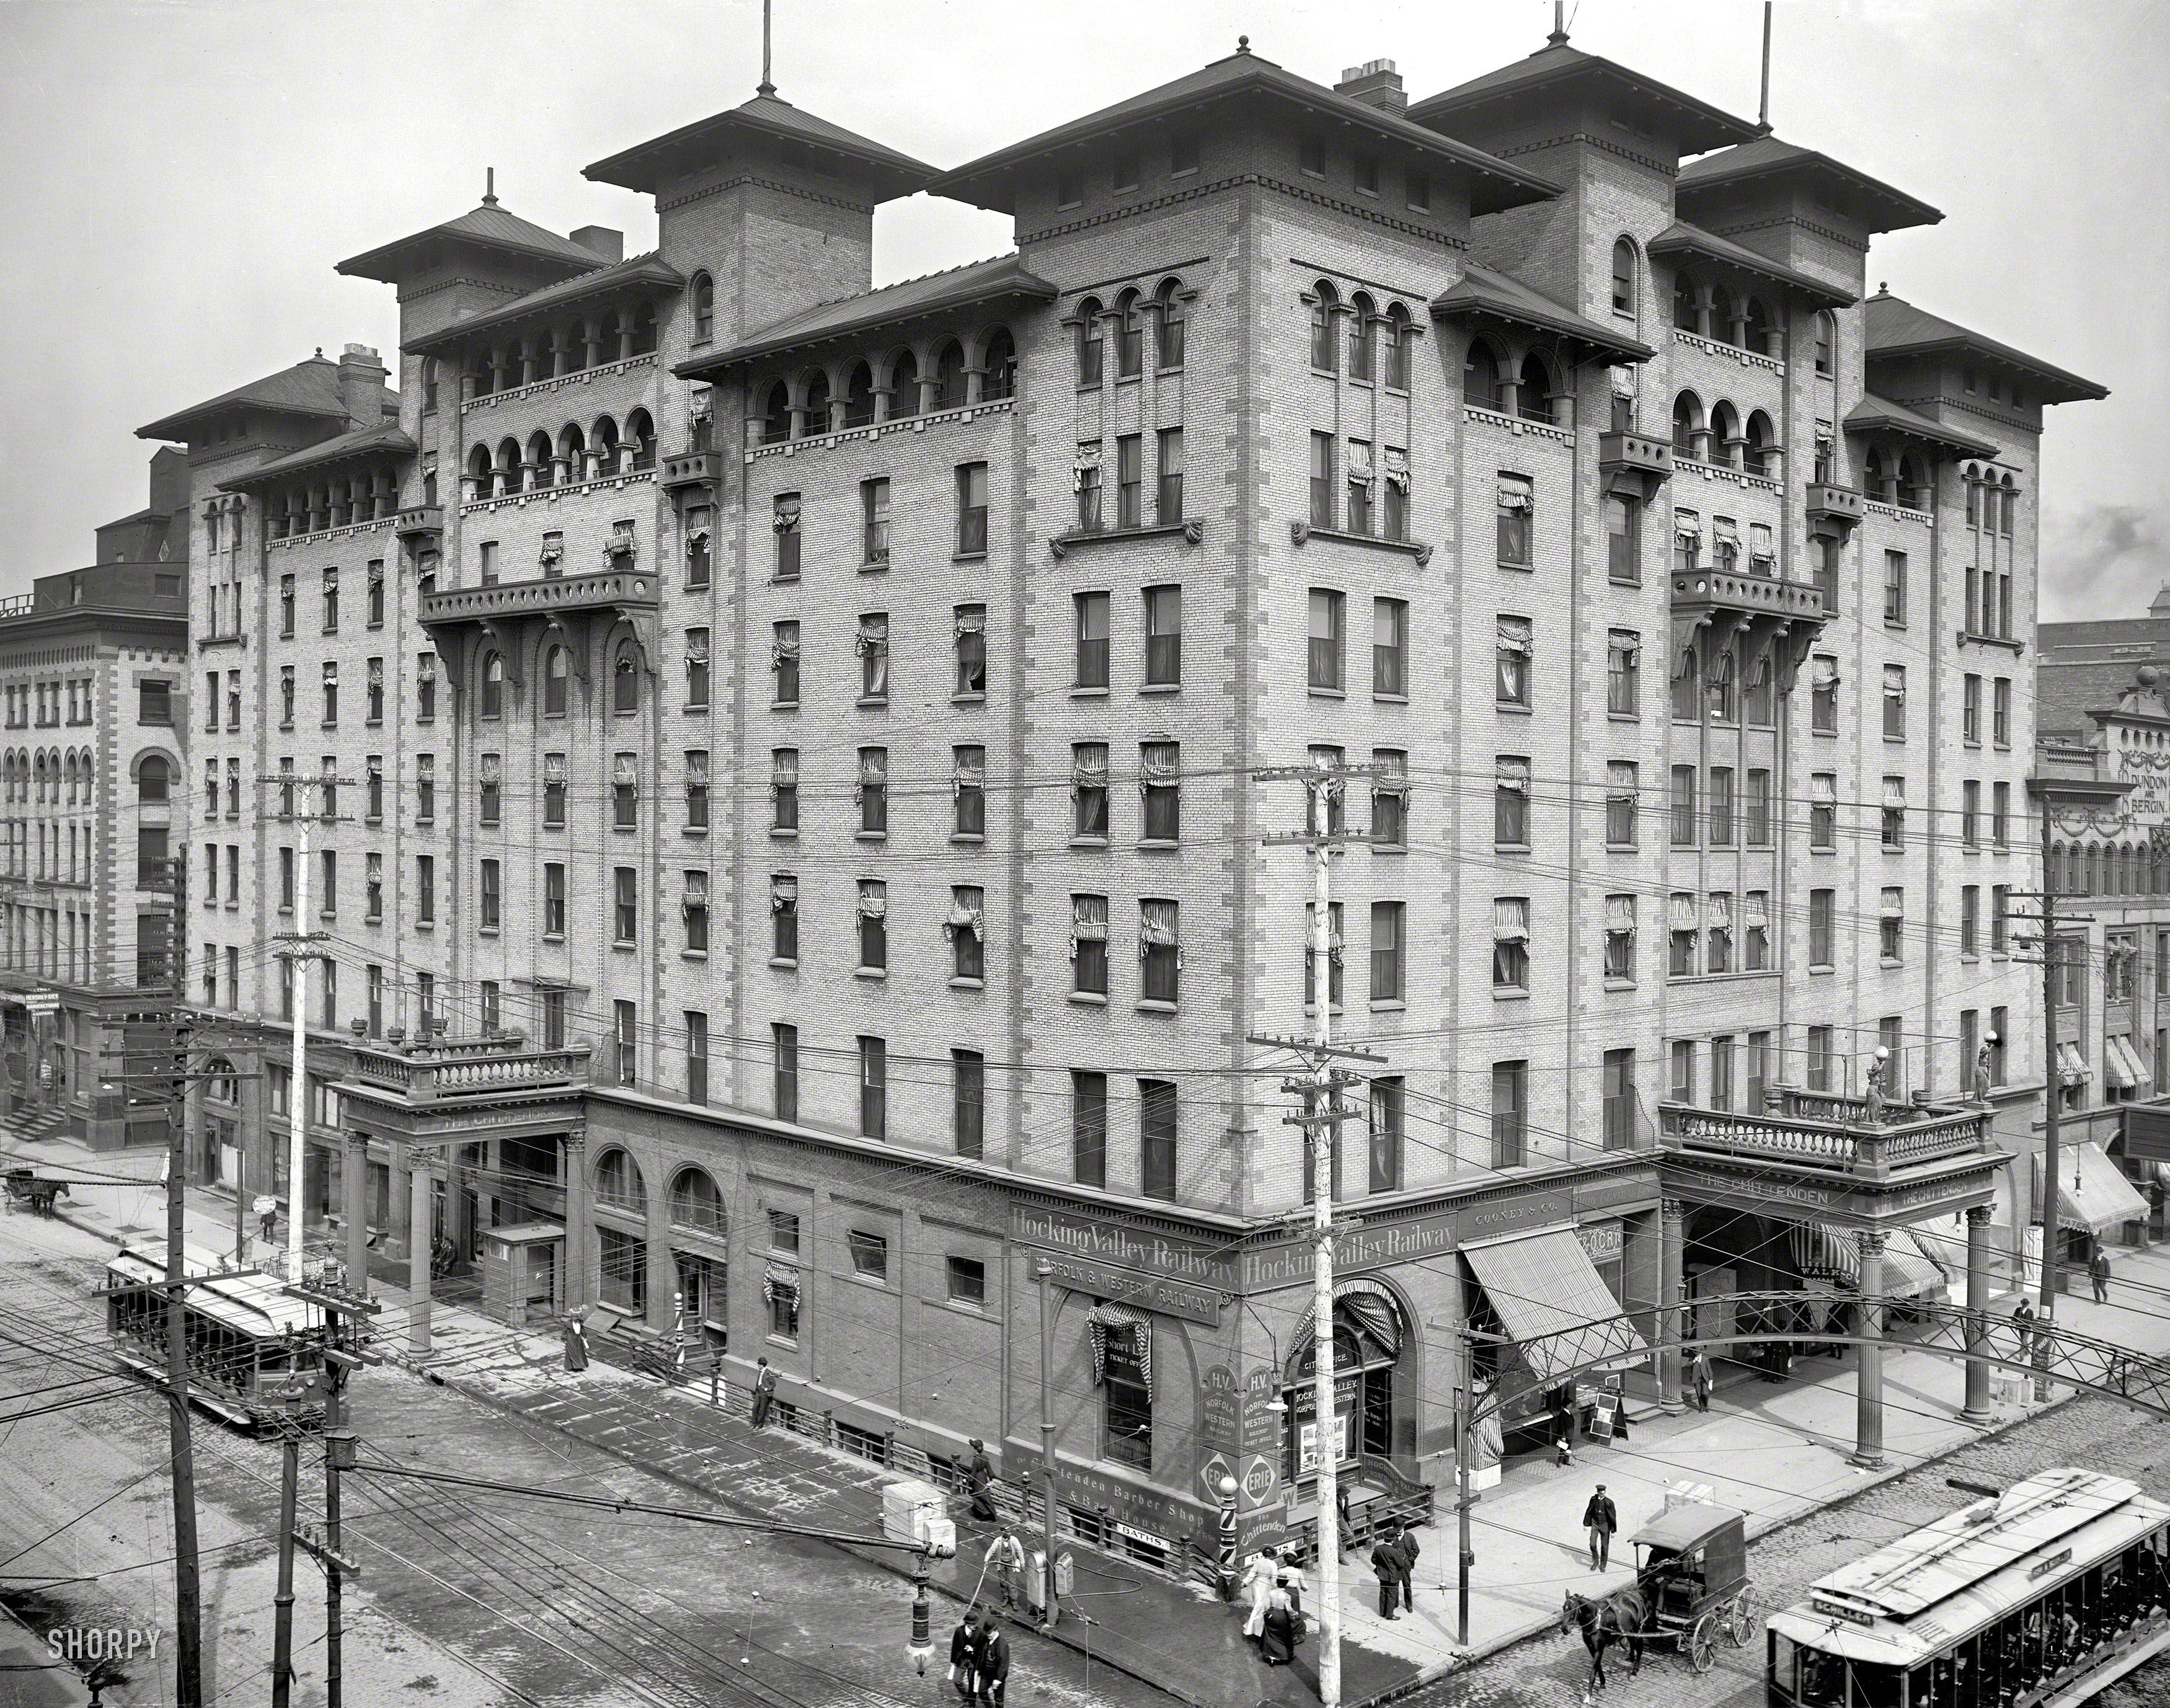 Columbus, Ohio, 1904. "Chittenden Hotel." Opened 1895, razed 1973. The final installment of our Columbus Day trilogy. 8x10 glass negative. View full size.